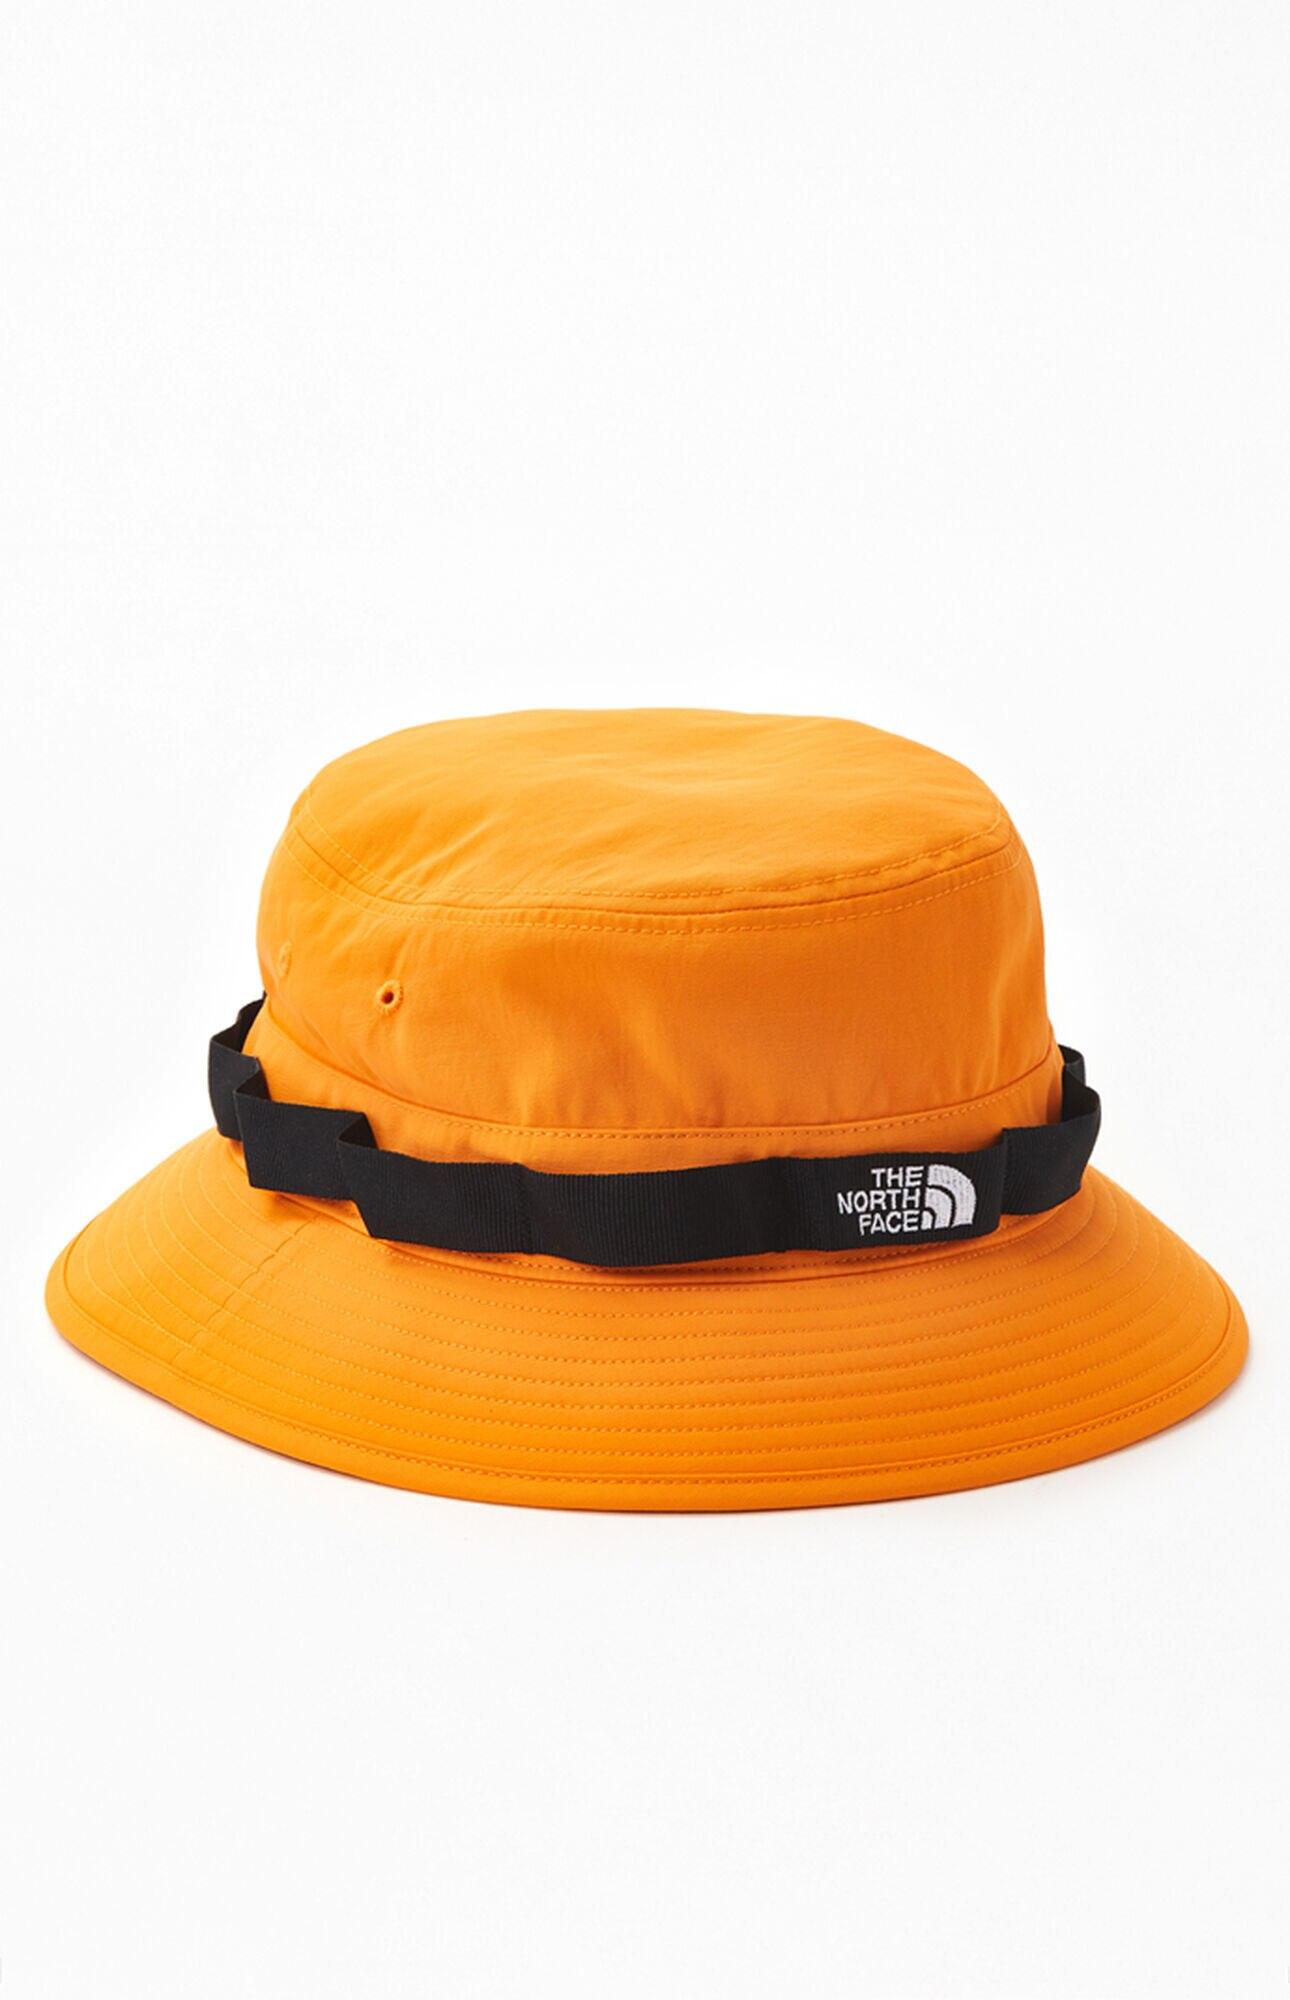 The North Face Synthetic Class V Brimmer Hat in Orange for Men - Lyst